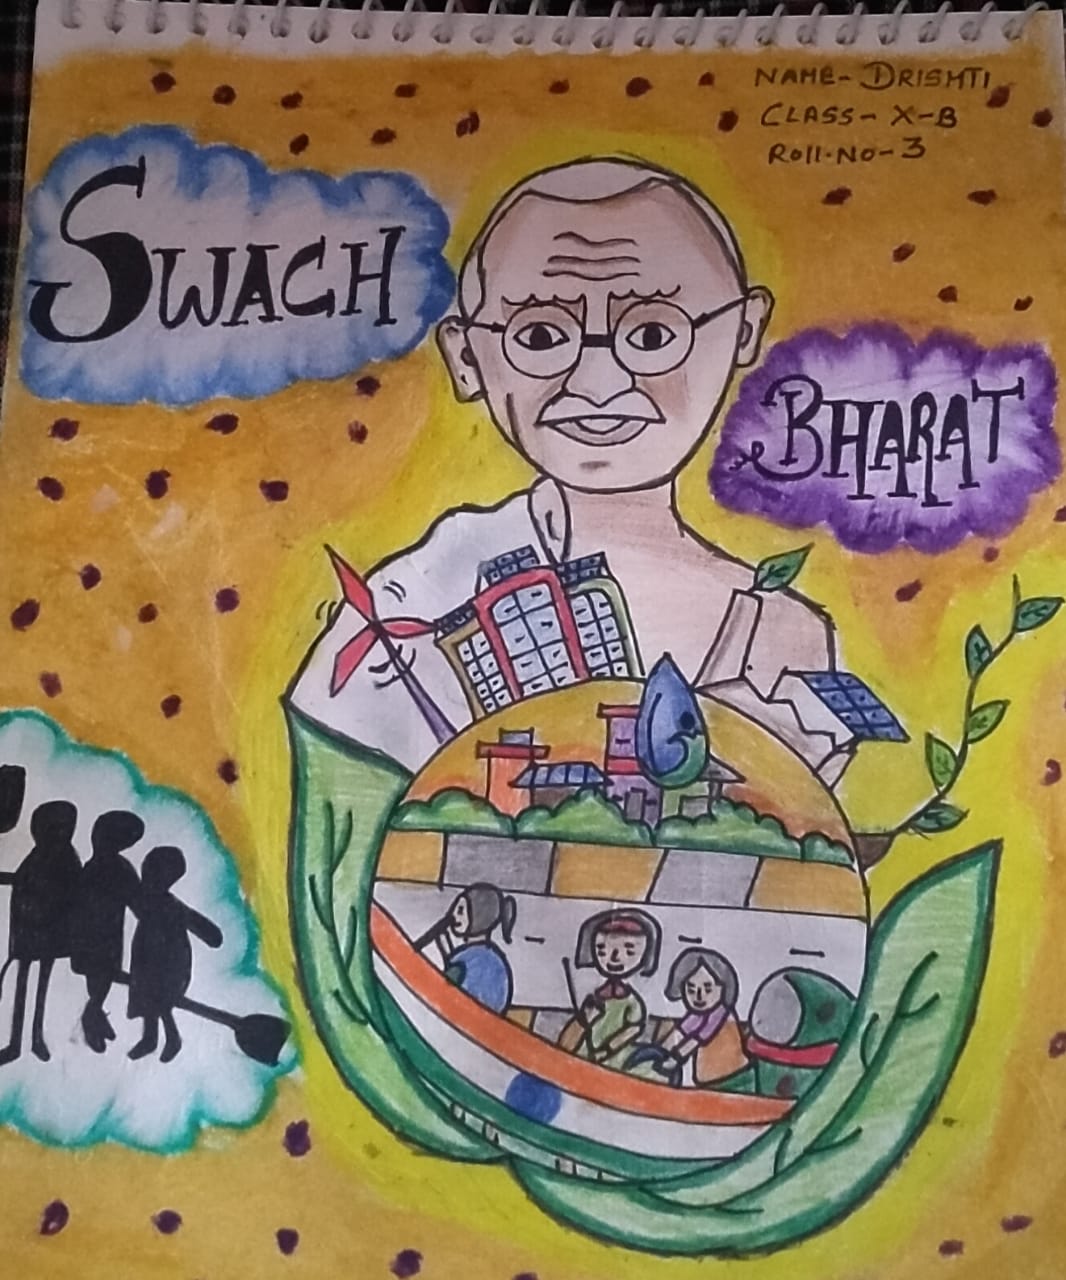 Humiliated by Swachh Bharat Abhiyan - The Companion